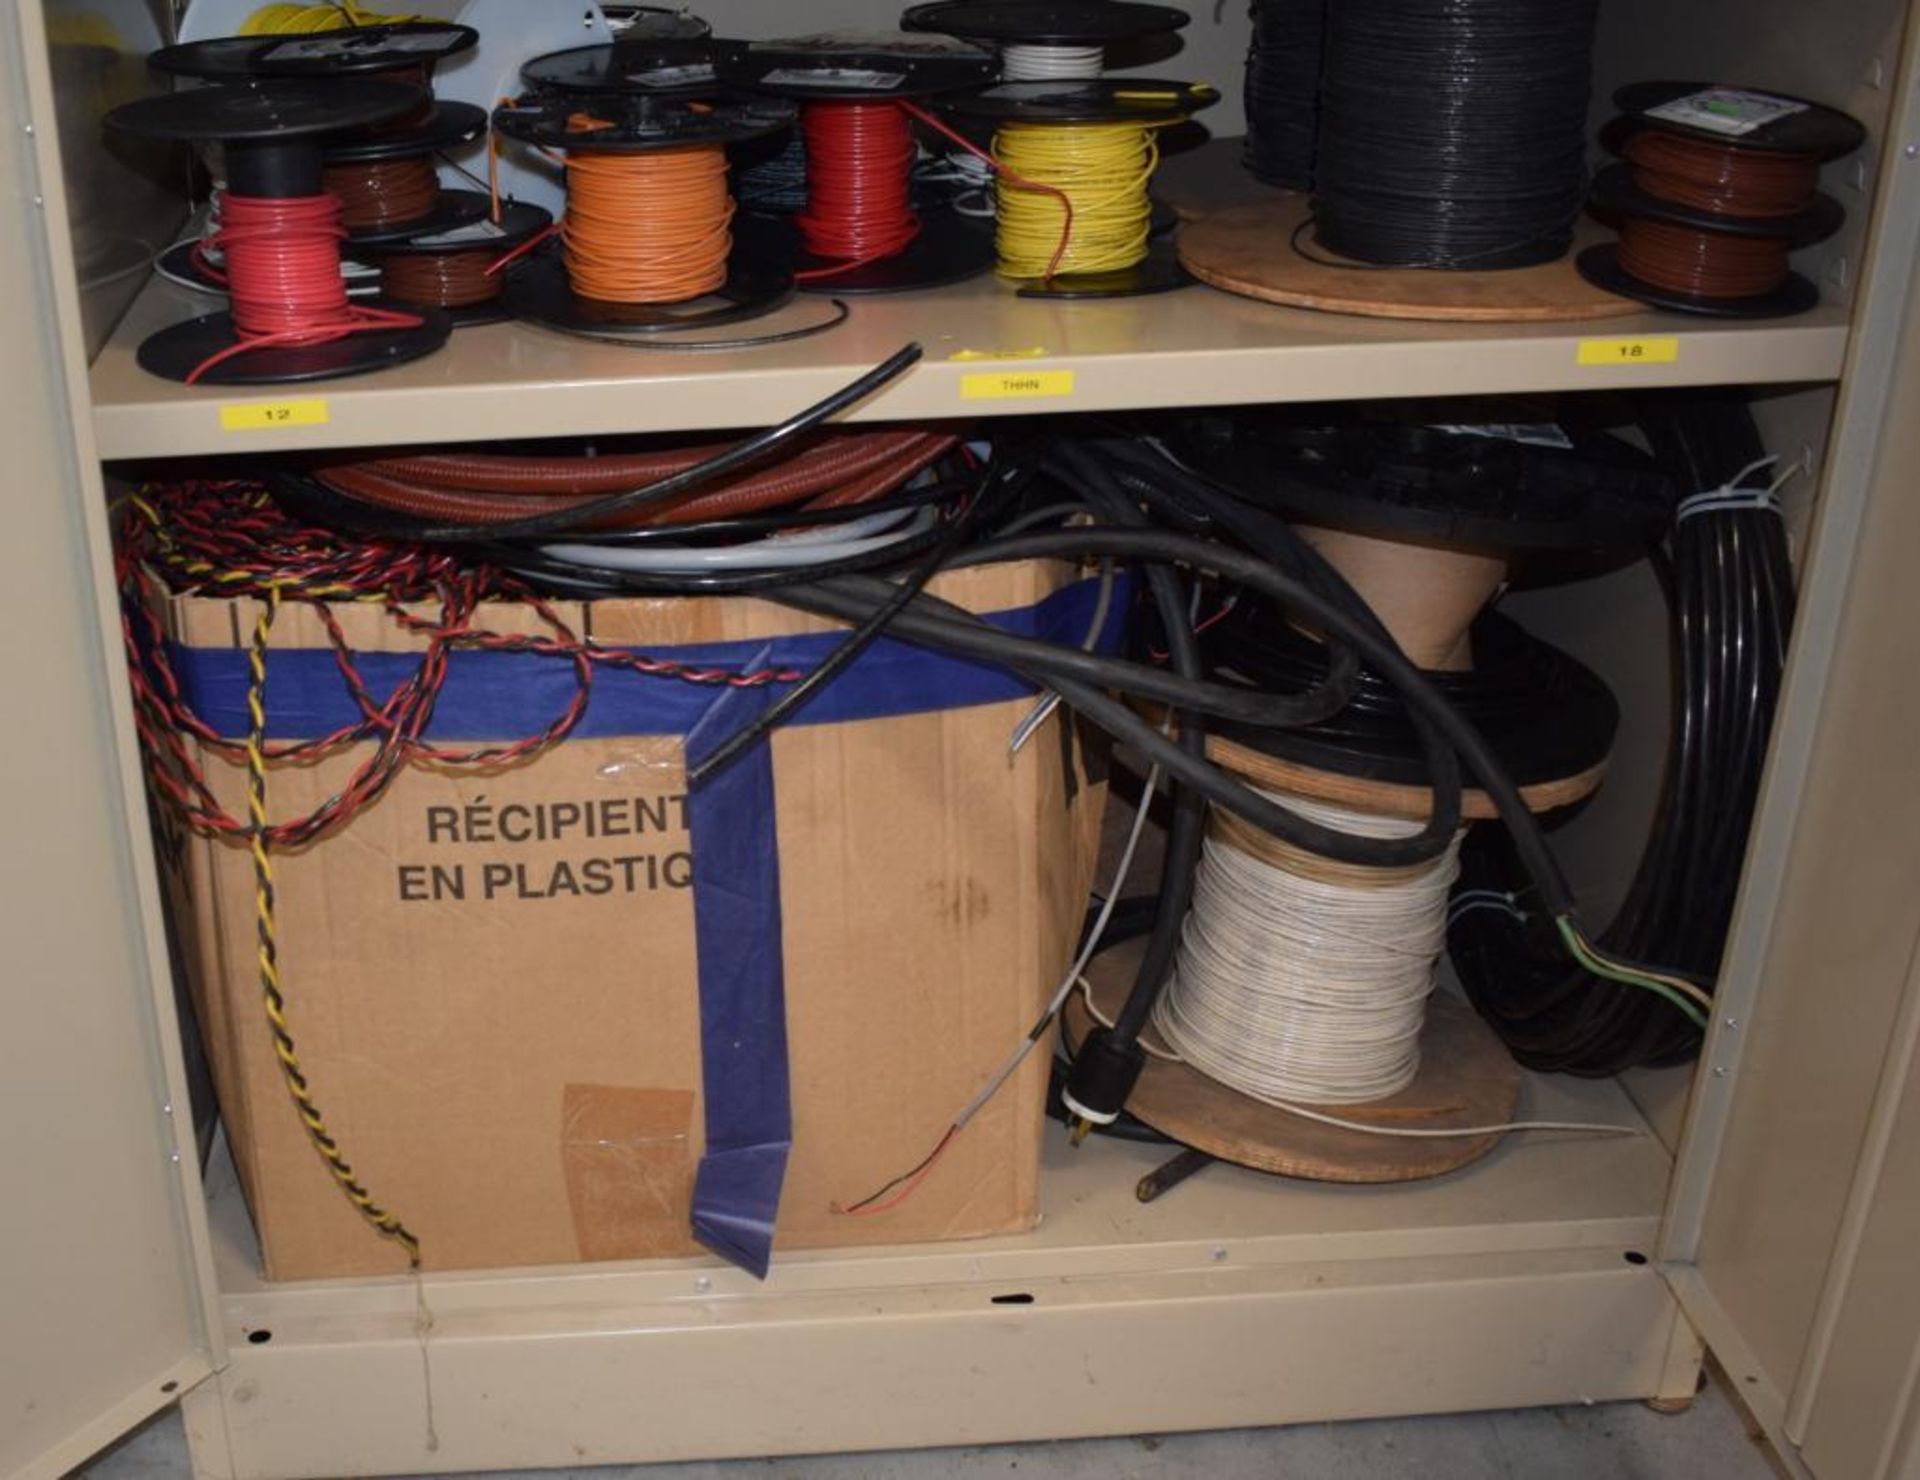 Lot Consisting Of: Miscellaneous Wire Spools, (1) 2 door metal cabinet, (2) wire spool carts. - Image 6 of 8